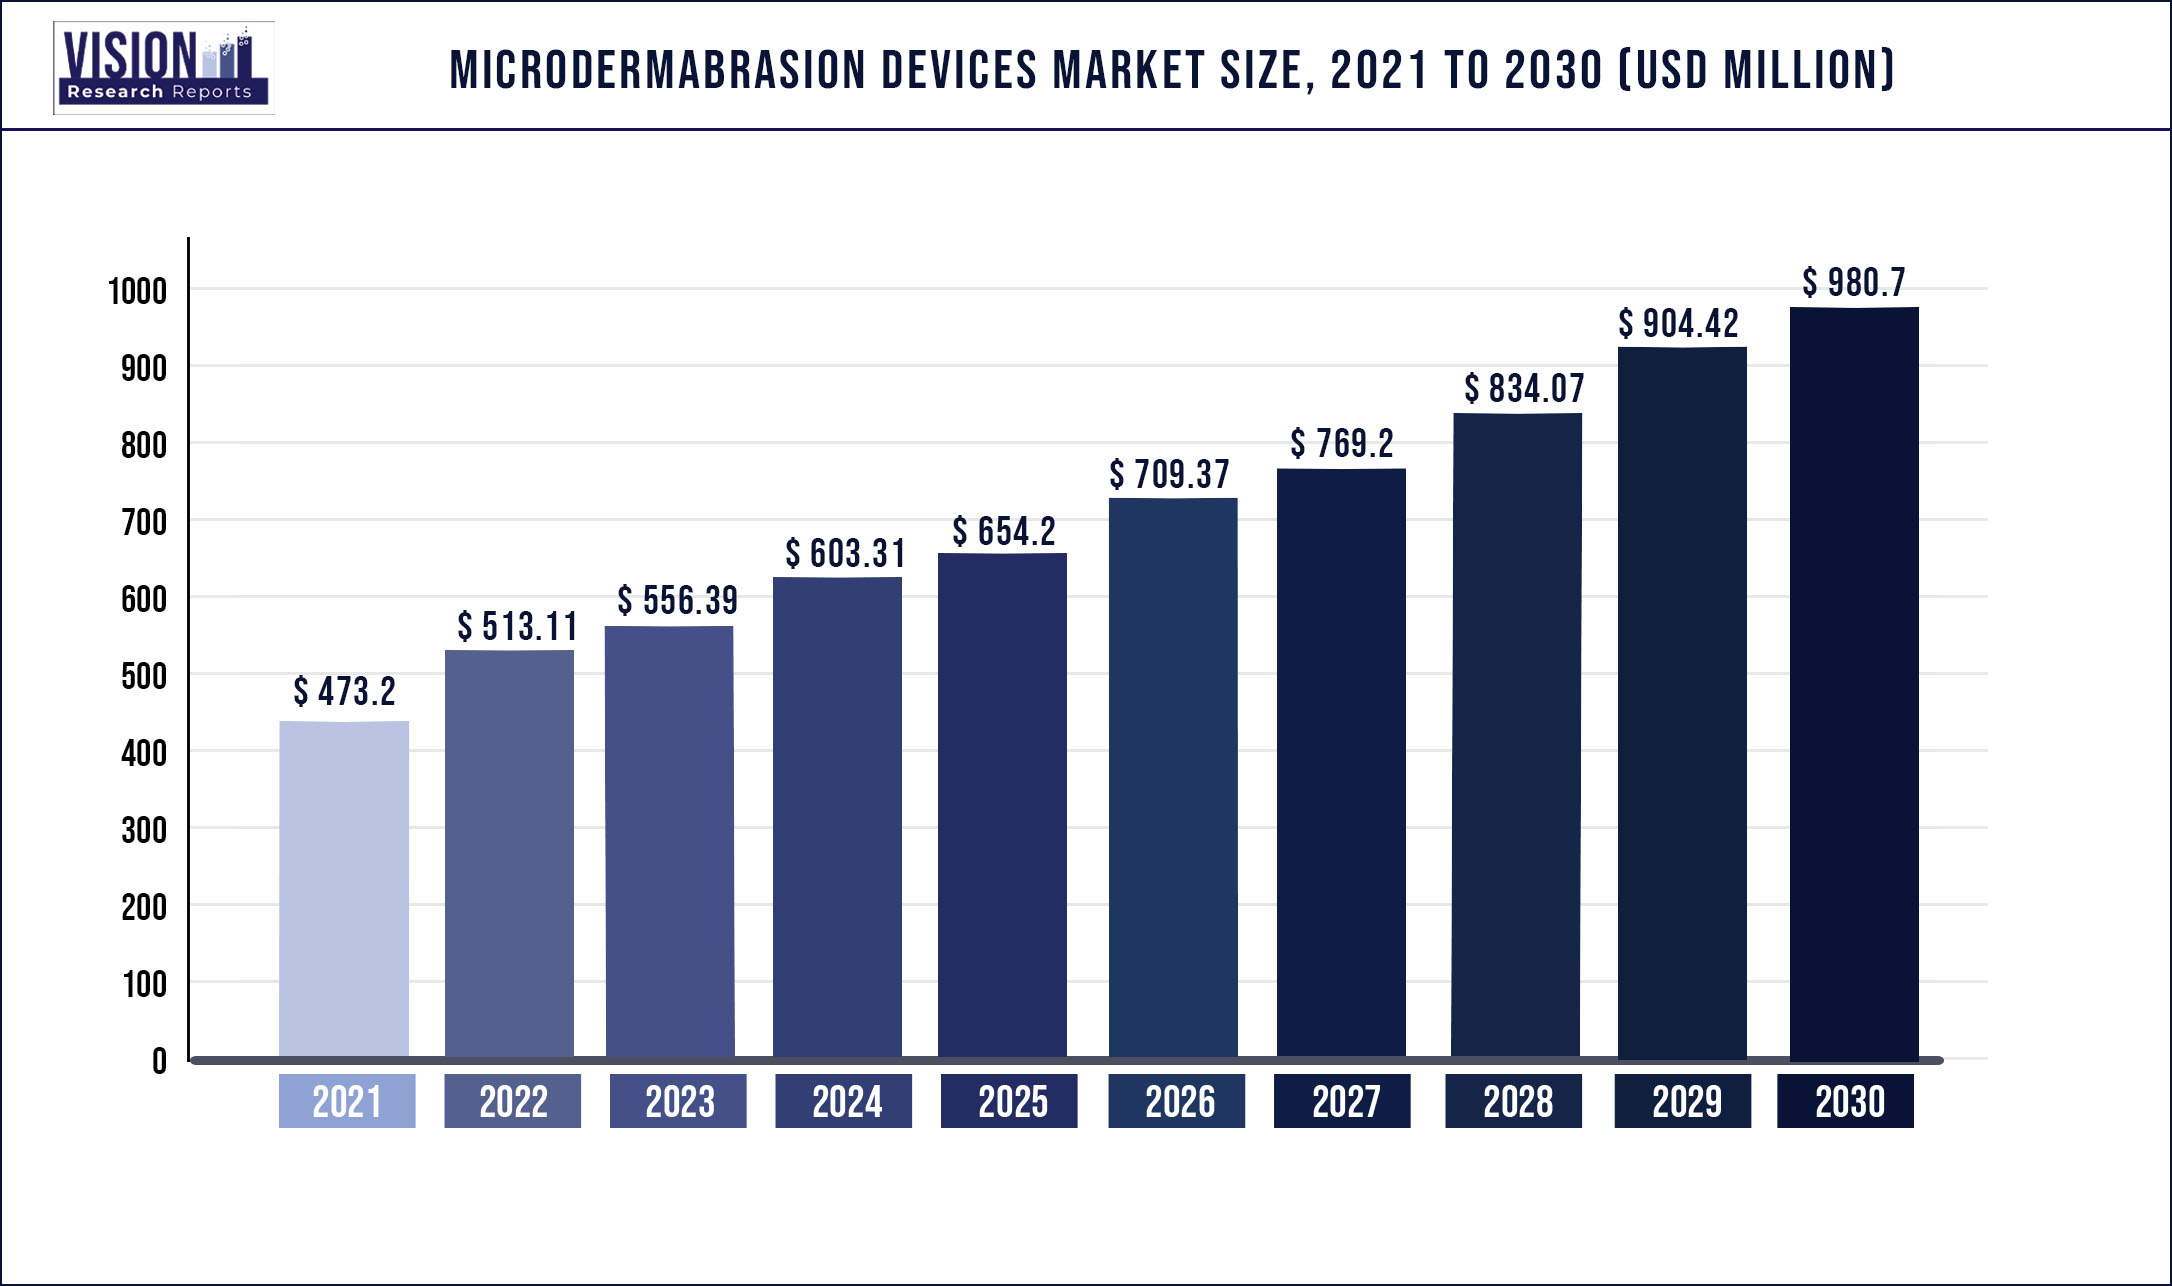 Microdermabrasion Devices Market Size 2021 to 2030